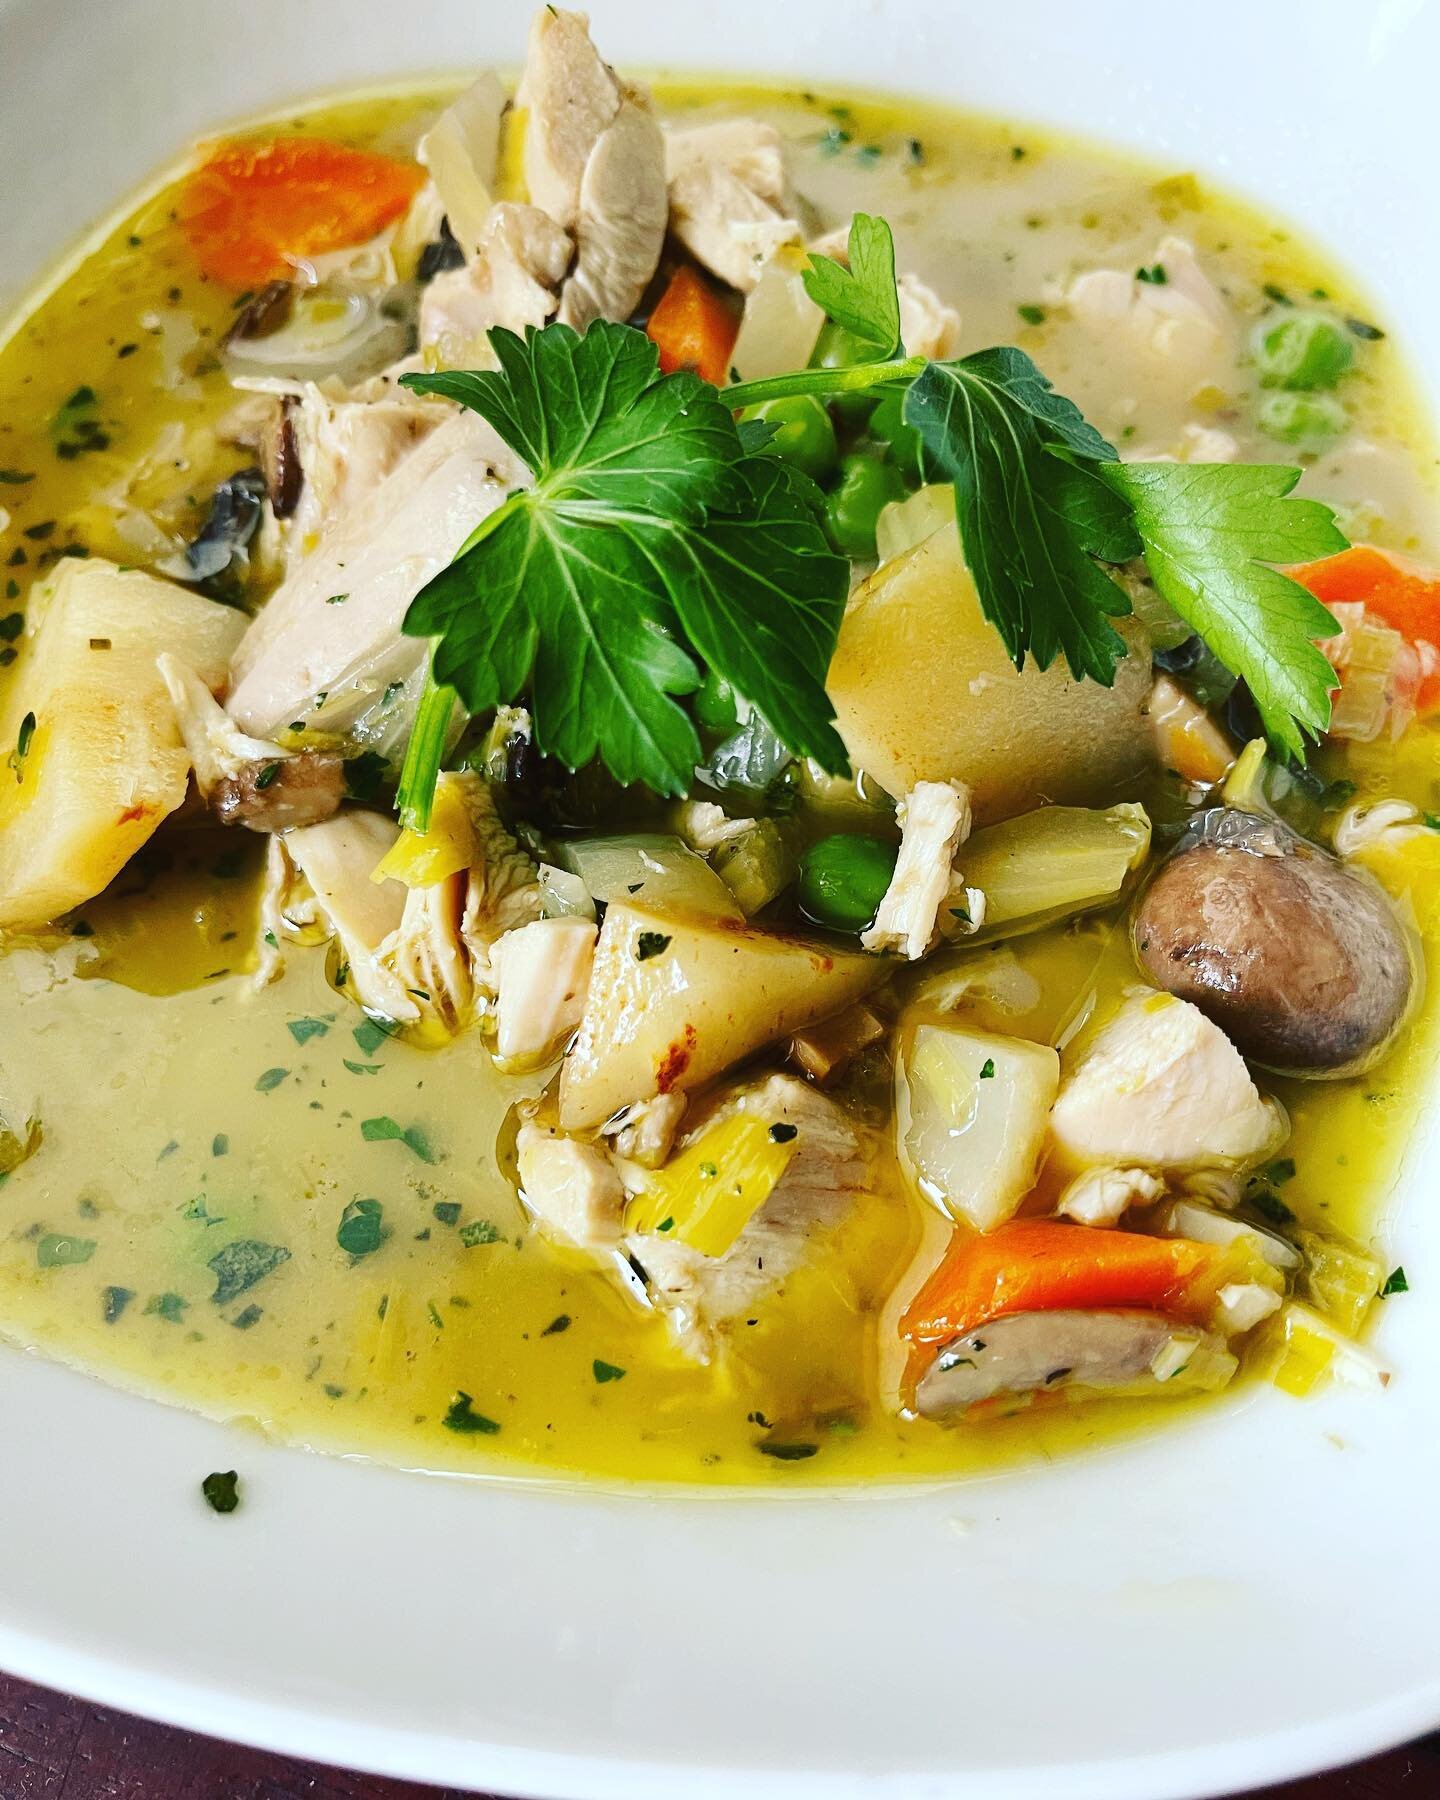 A fan favorite is back on our &ldquo;Staples&rdquo; menu!  Spring Vegetable-Chicken Stew w/ Lemon and Herbs.  Check out next week&rsquo;s menus&hellip; link in bio and comments! #thewholejam#mealdeliveryservice #hinghamma #cohassetma #hullma #norwell